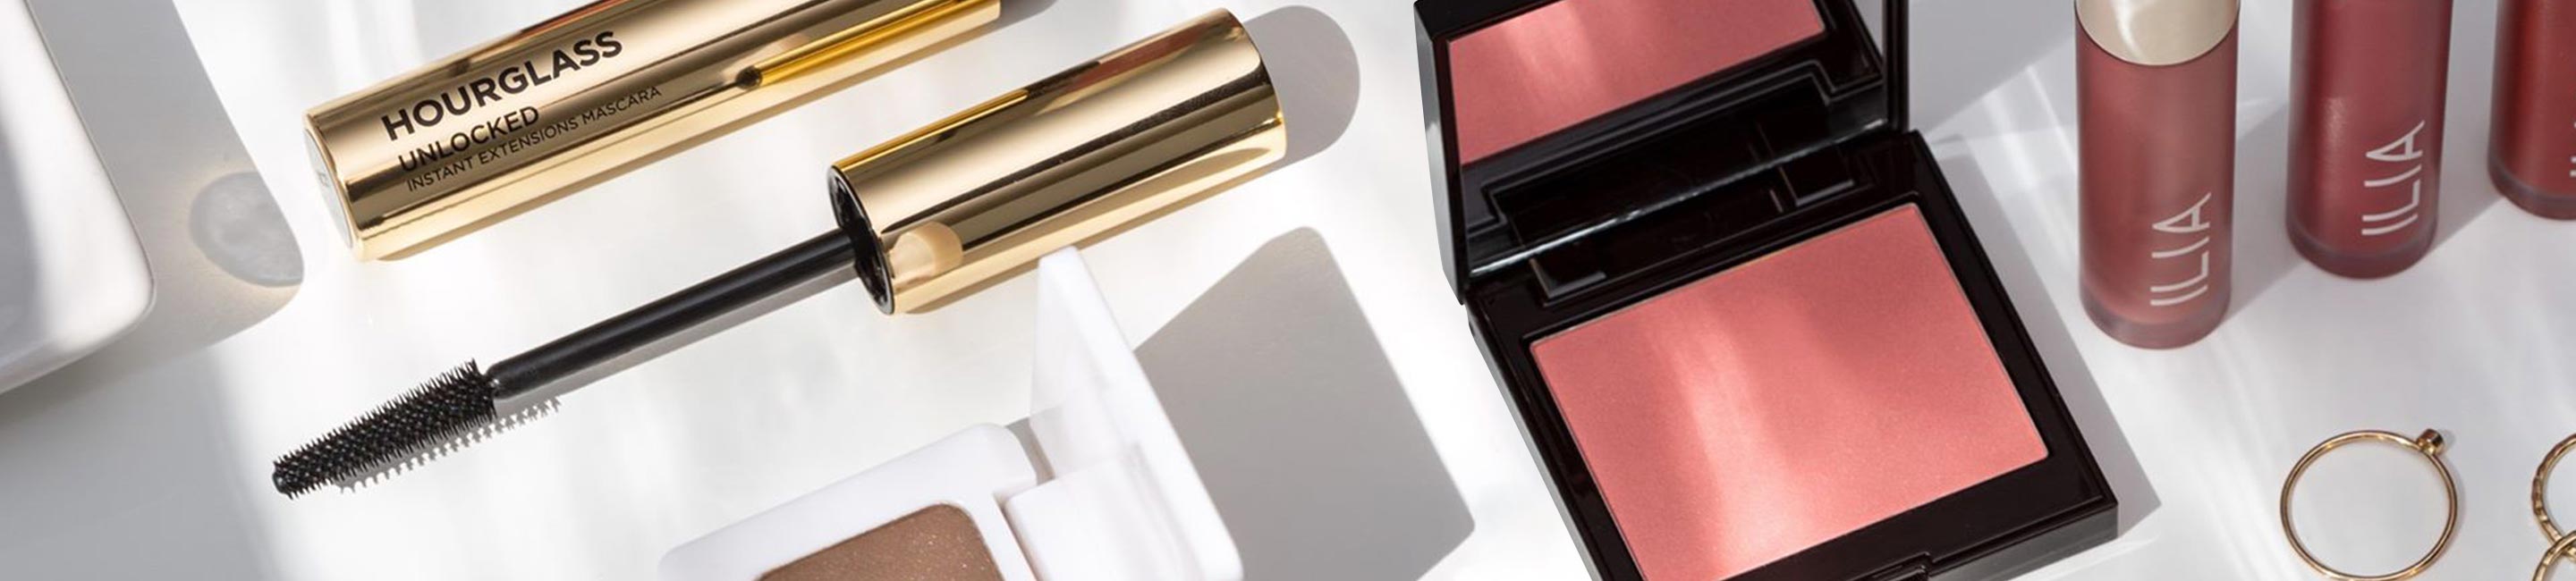 Chantecaille, Nars, Ilia and more Fall Beauty brands